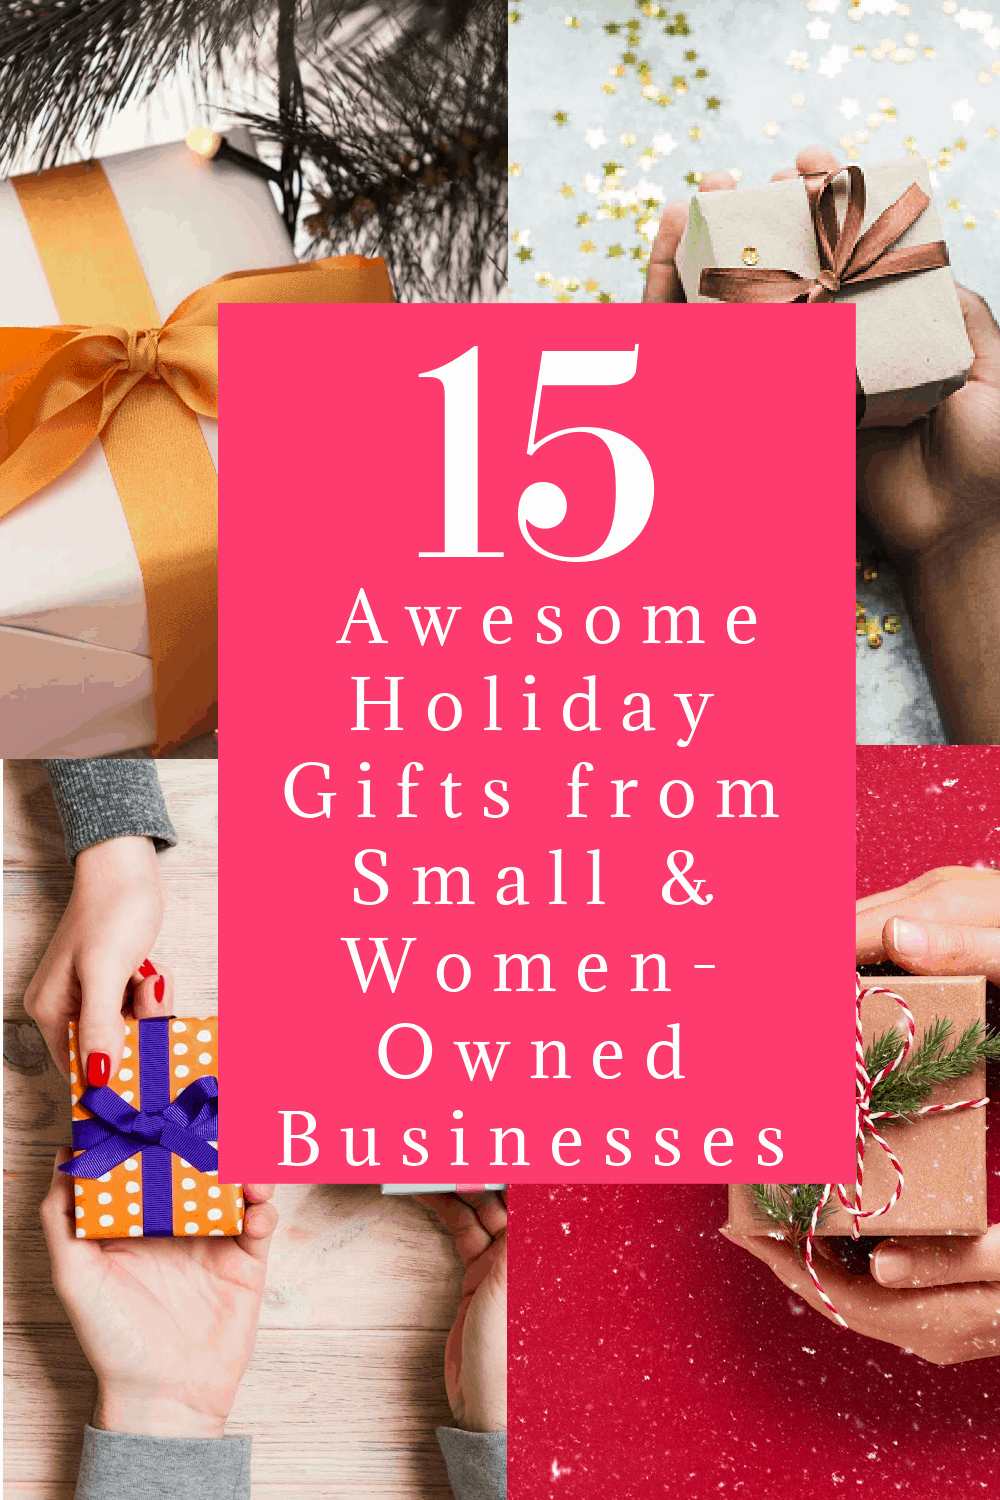 https://www.prettyopinionated.com/wp-content/uploads/2020/11/holiday-gifts-small-women-owned-p.png